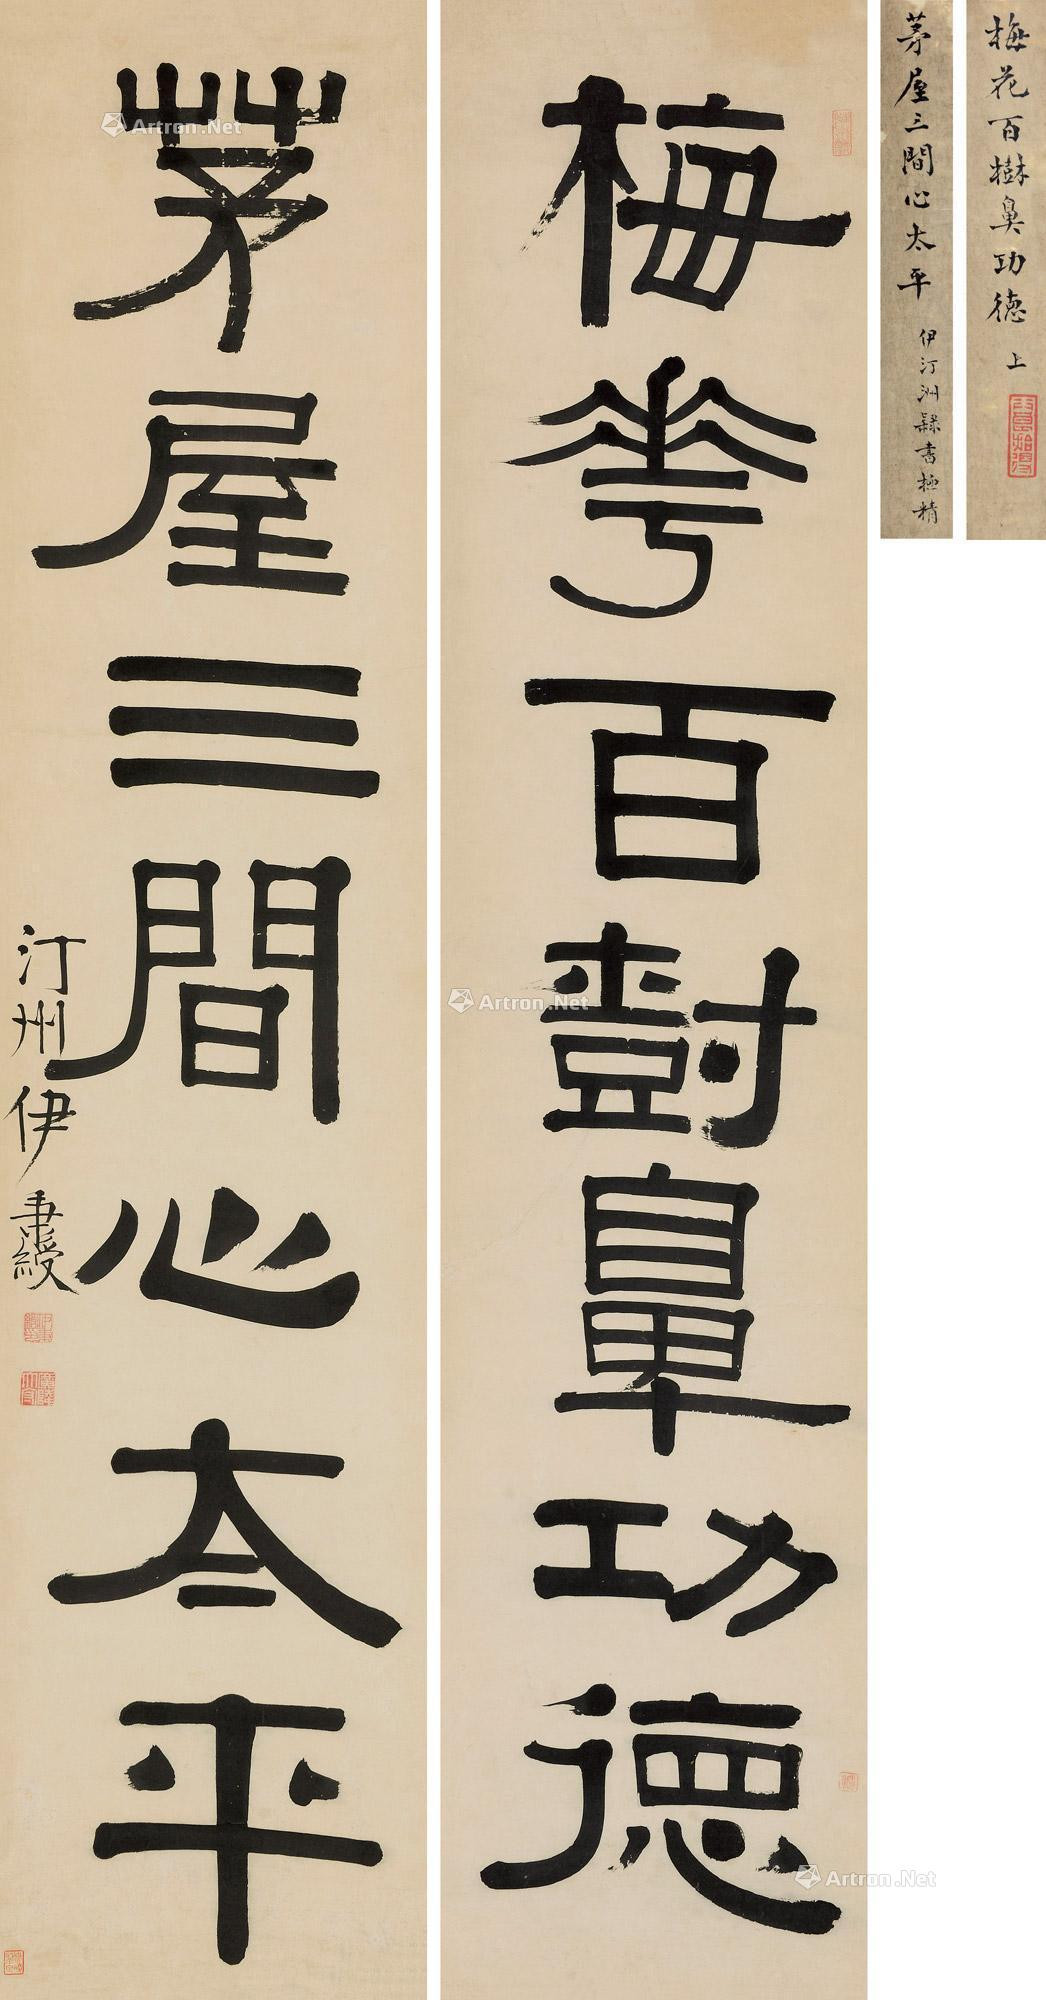 SEVEN-CHARACTER CALLIGRAPHY COUPLET IN OFFICIAL SCRIPT